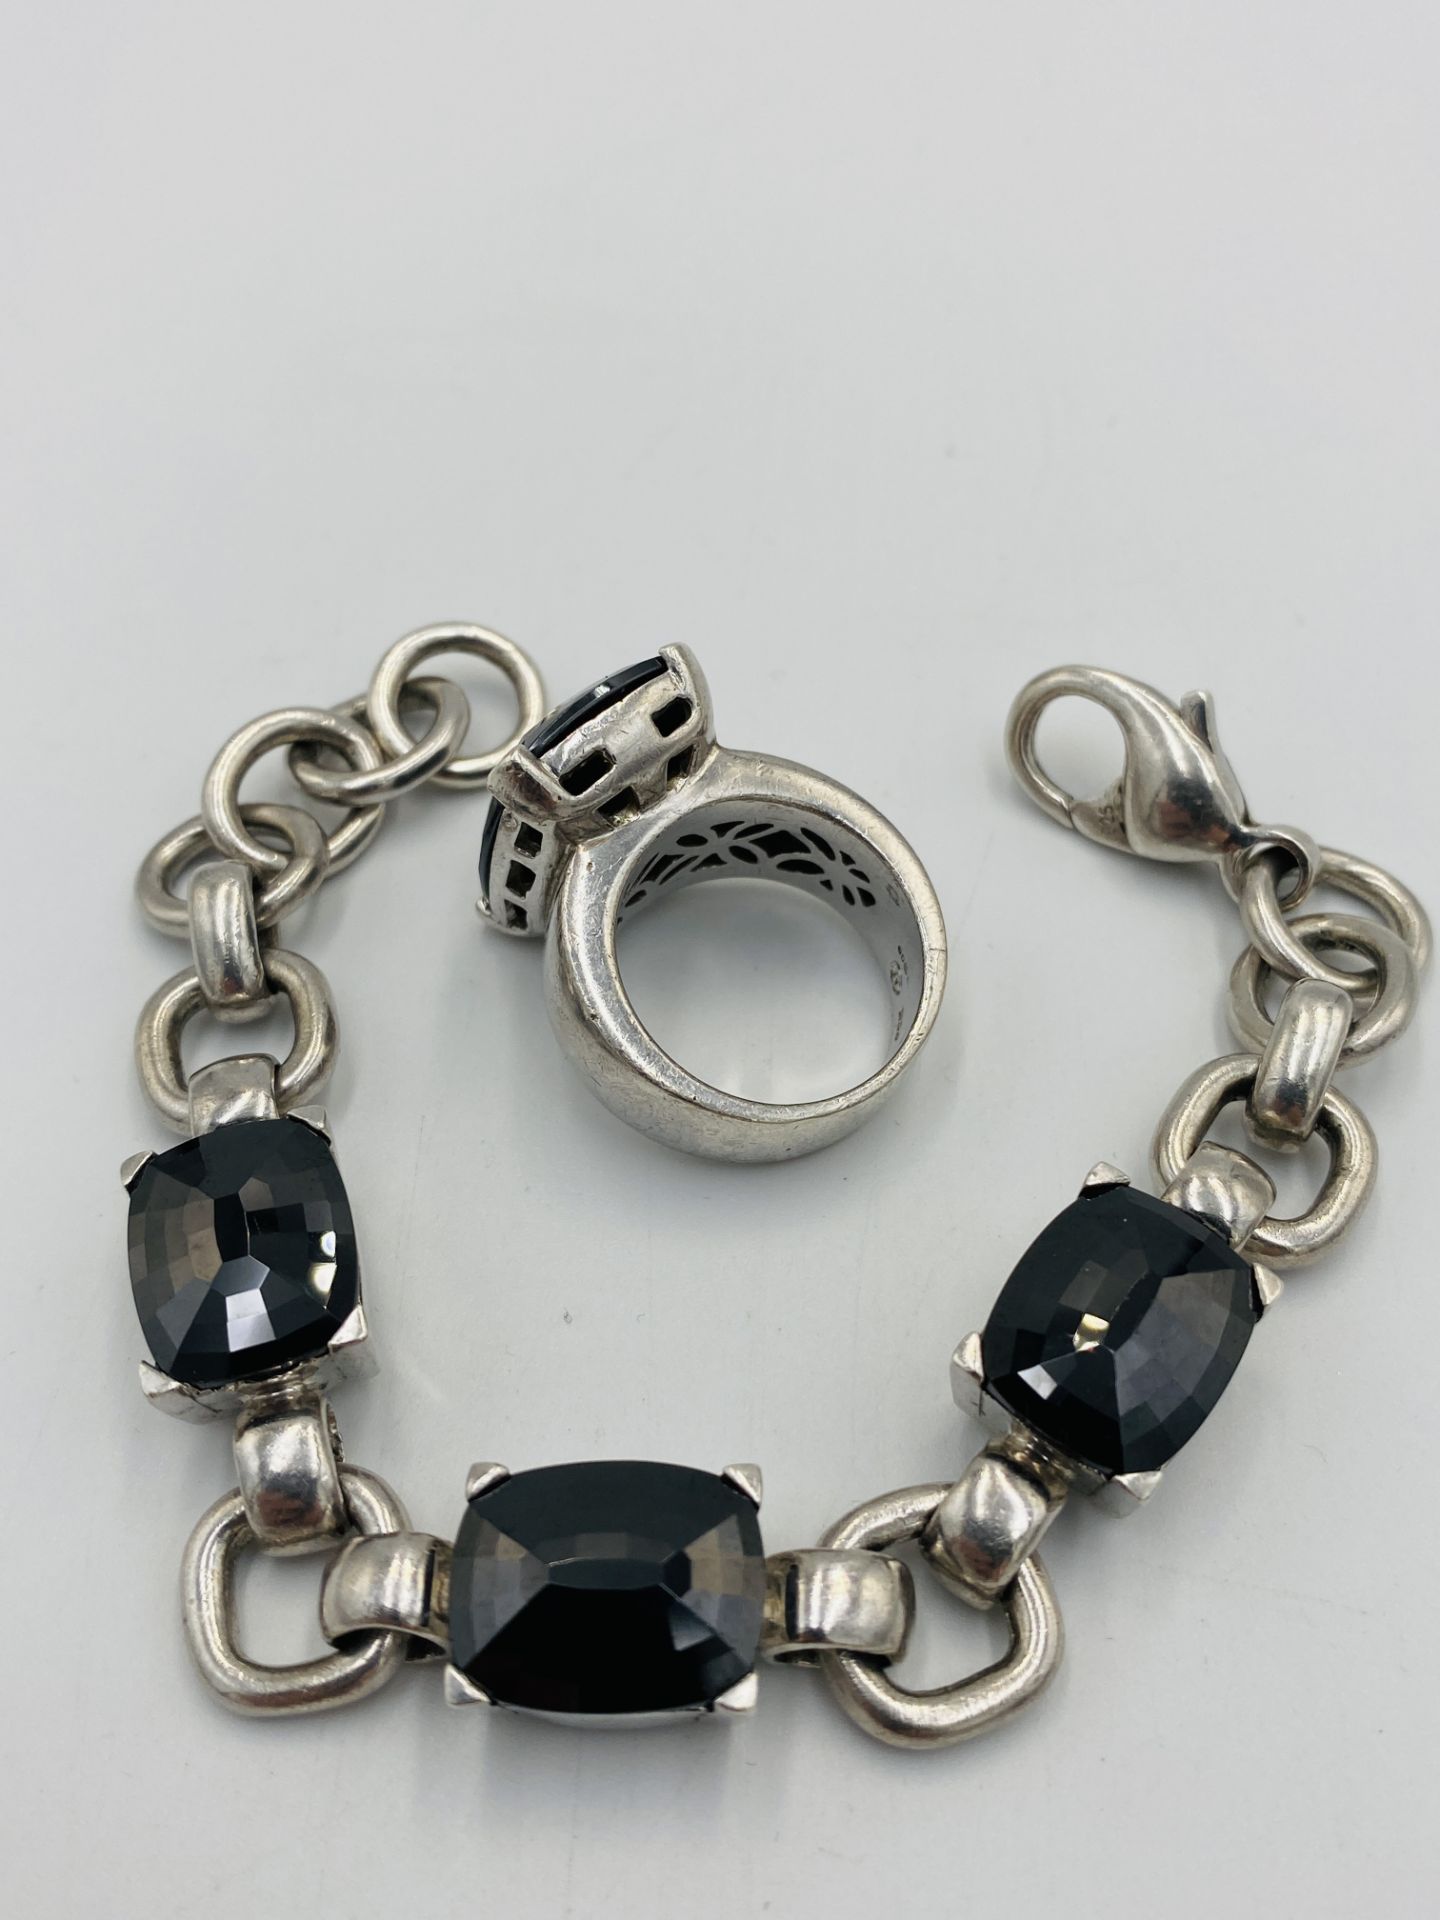 Silver ring with matching bracelet - Image 3 of 4